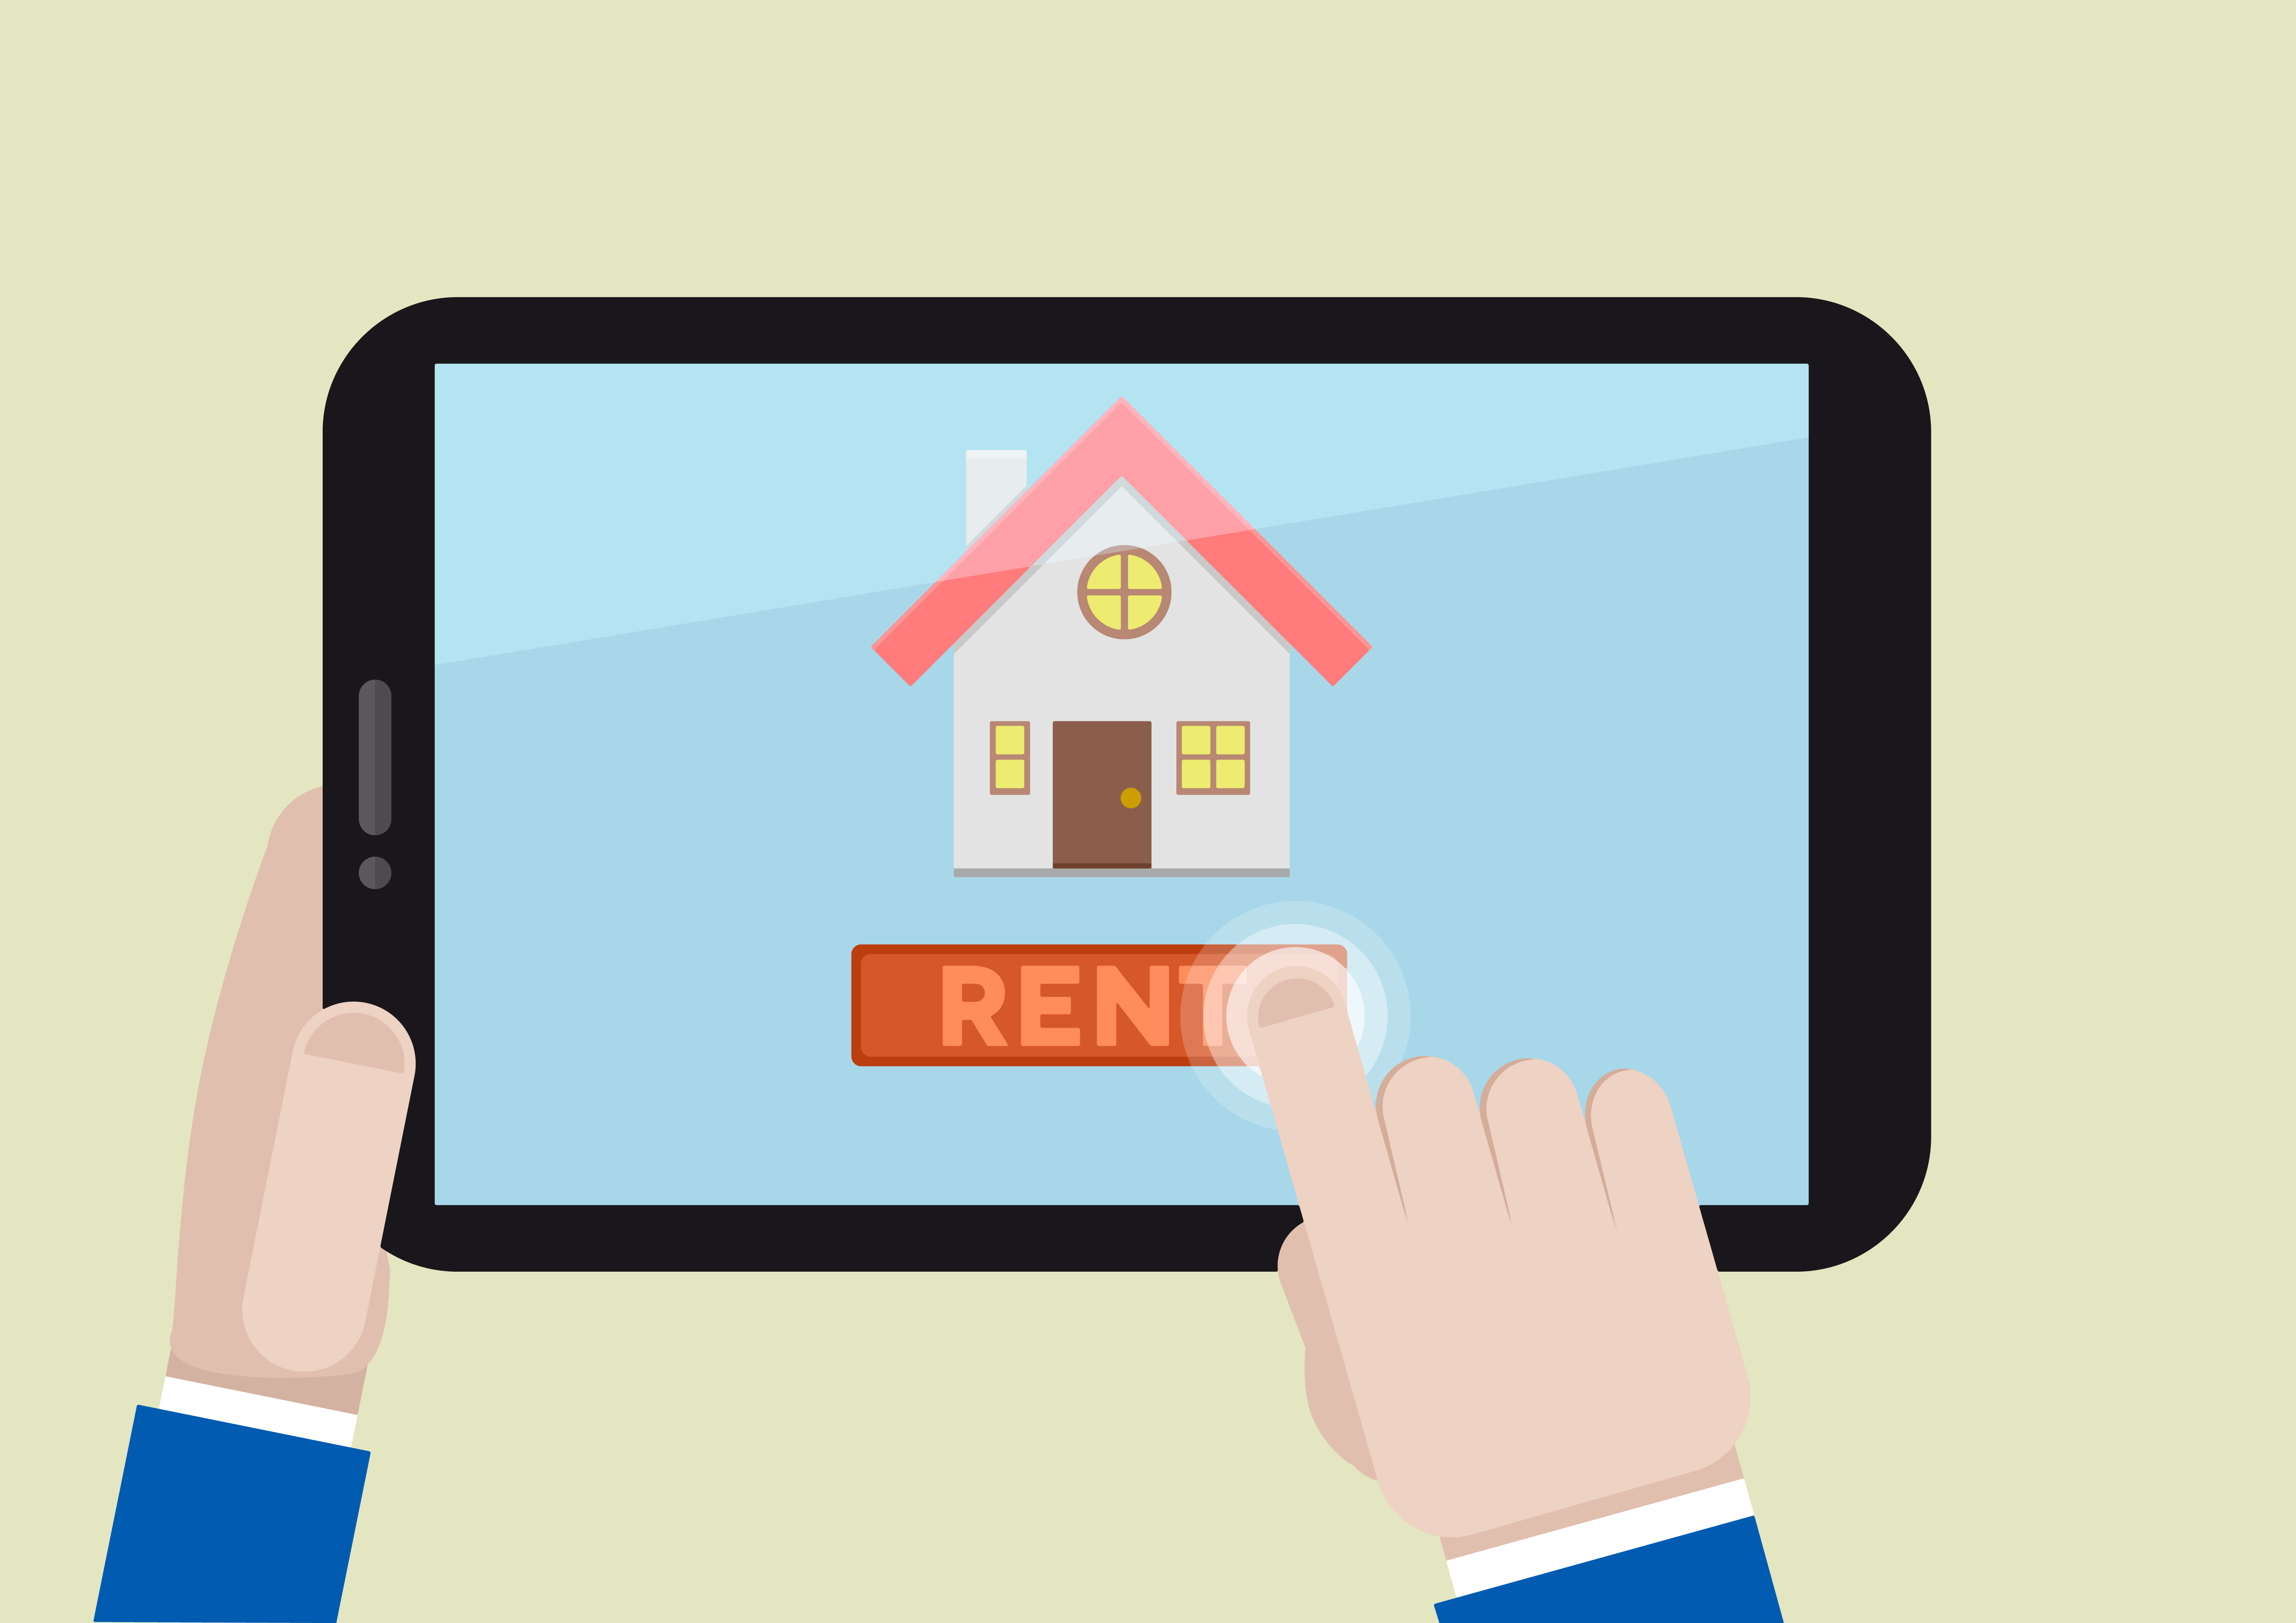 Find your ideal rental house with an agent